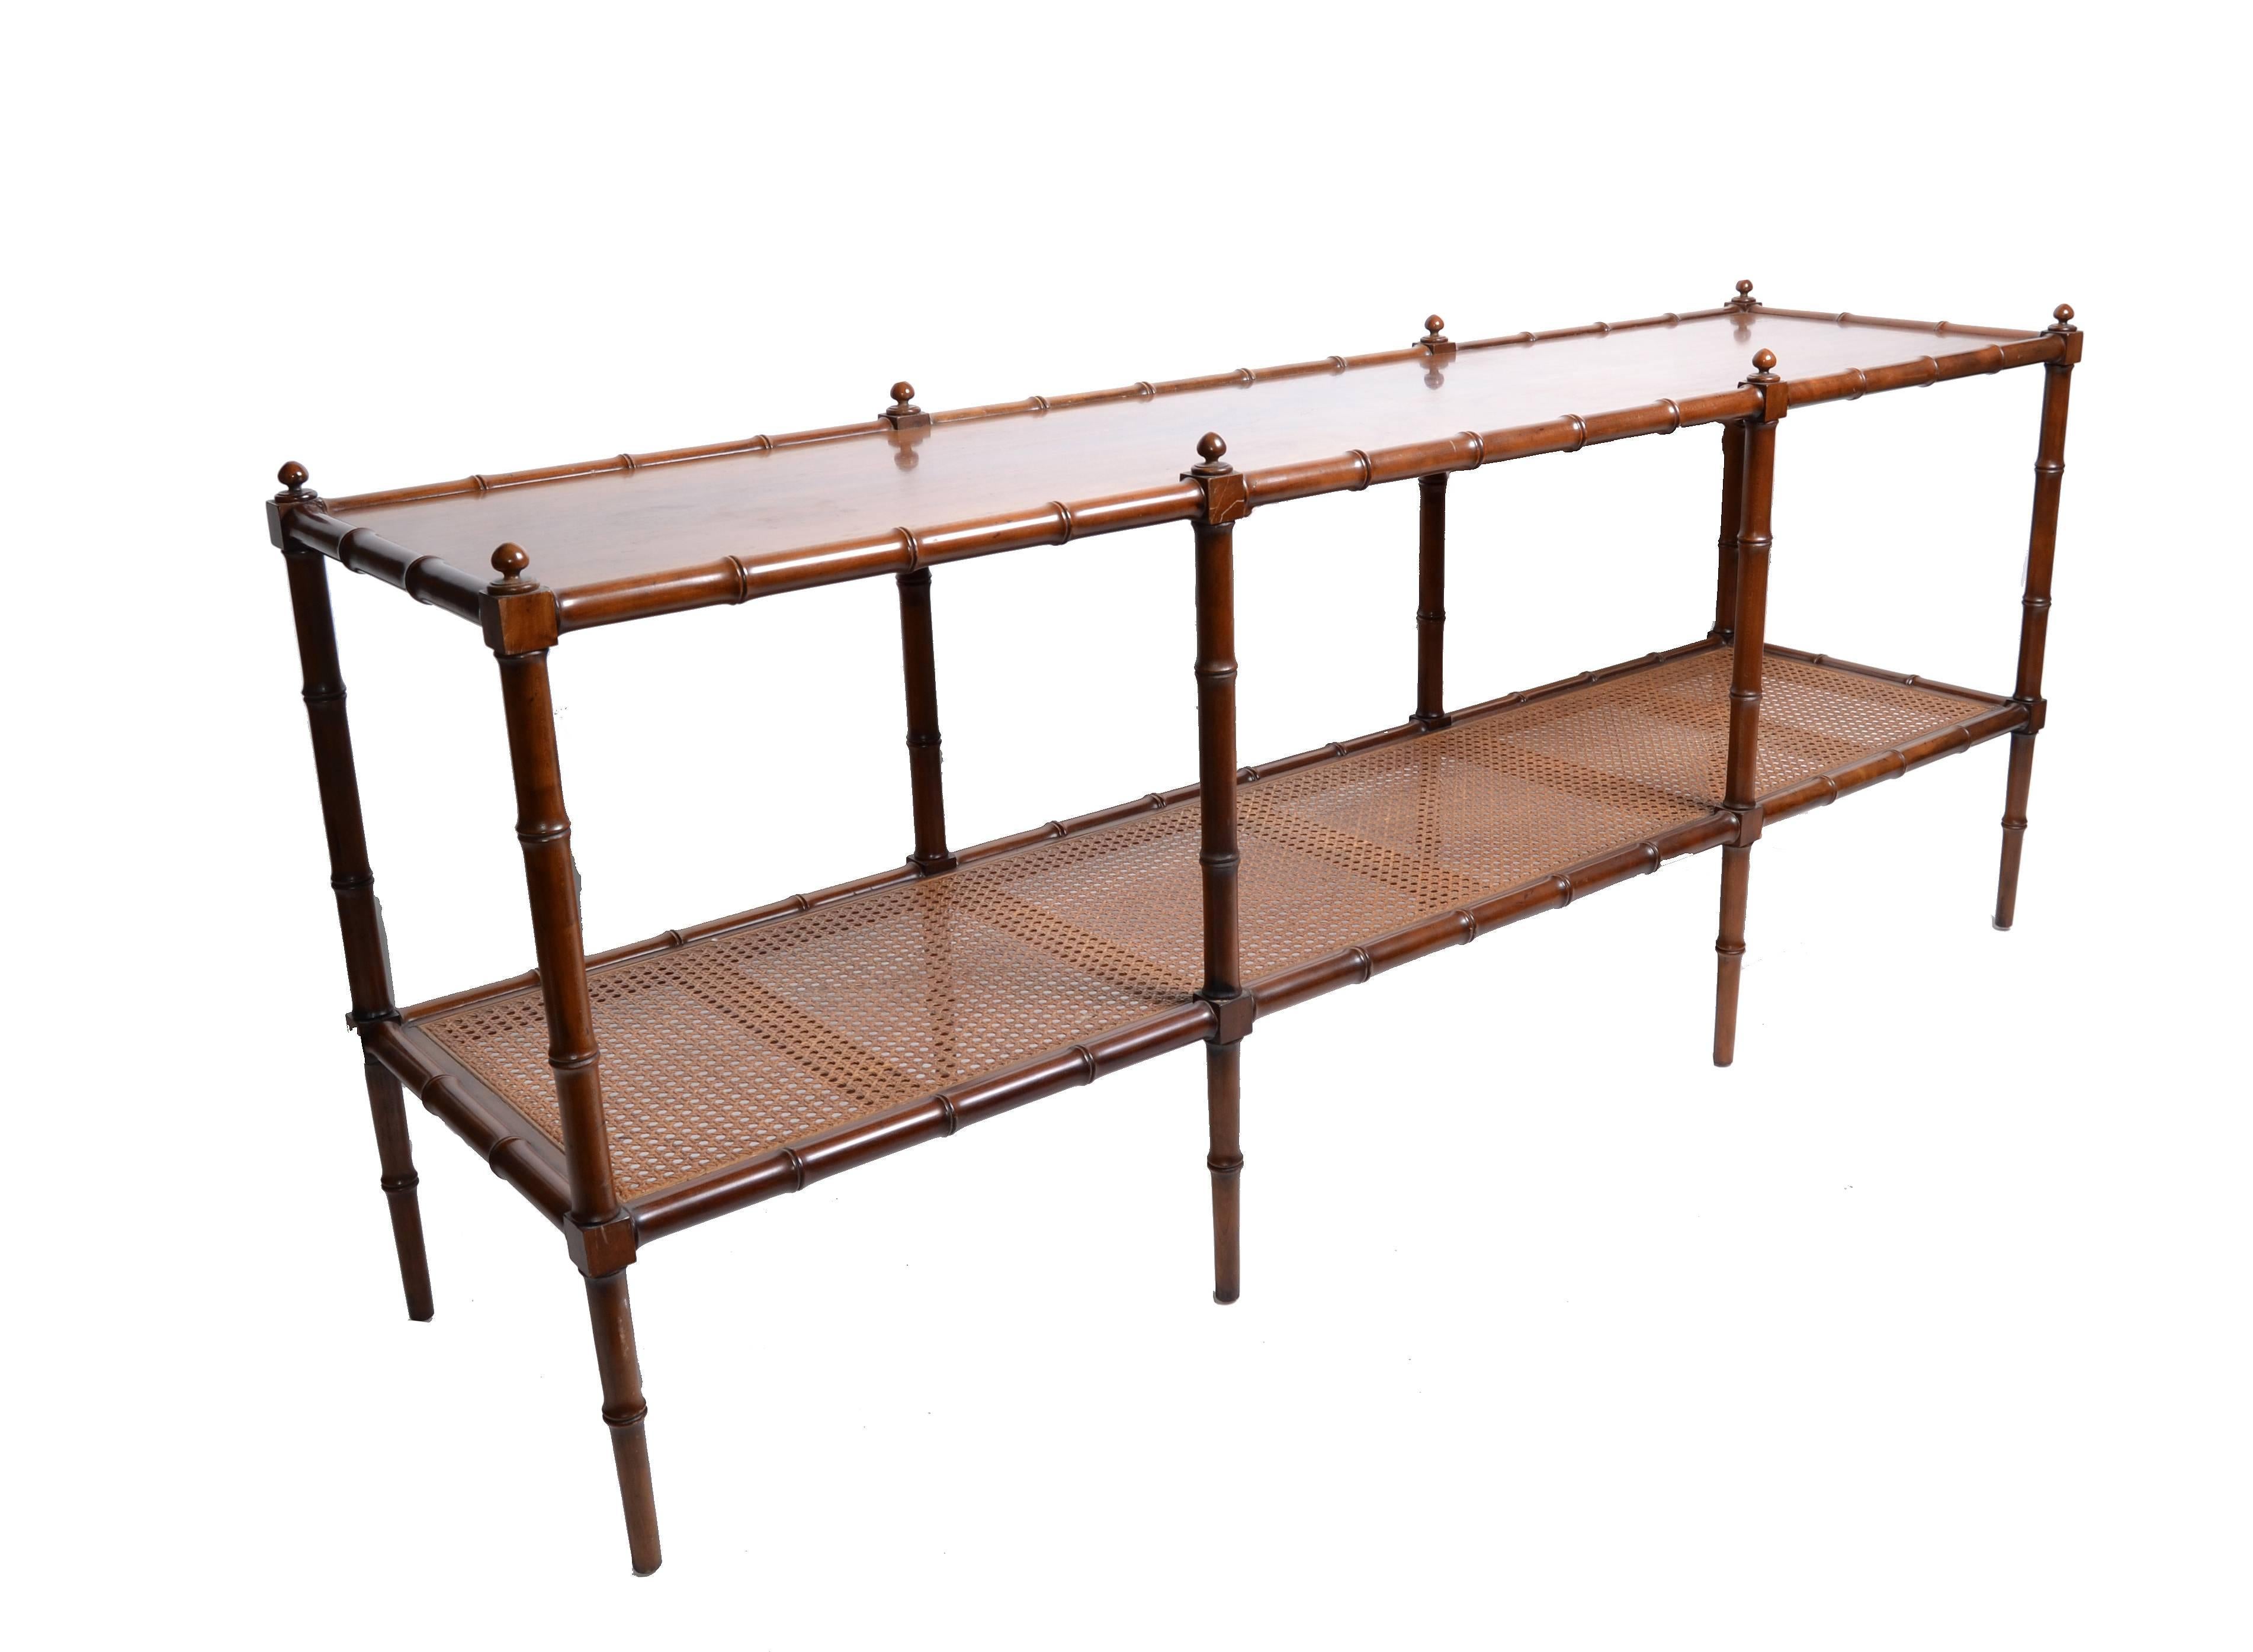 Stunning console table, sofa table or shelf with eight faux bamboo legs crowned with round finials. The walnut top has an incredible grain pattern and the lower cane shelf is great for storage.
The original baker furniture tag is attached